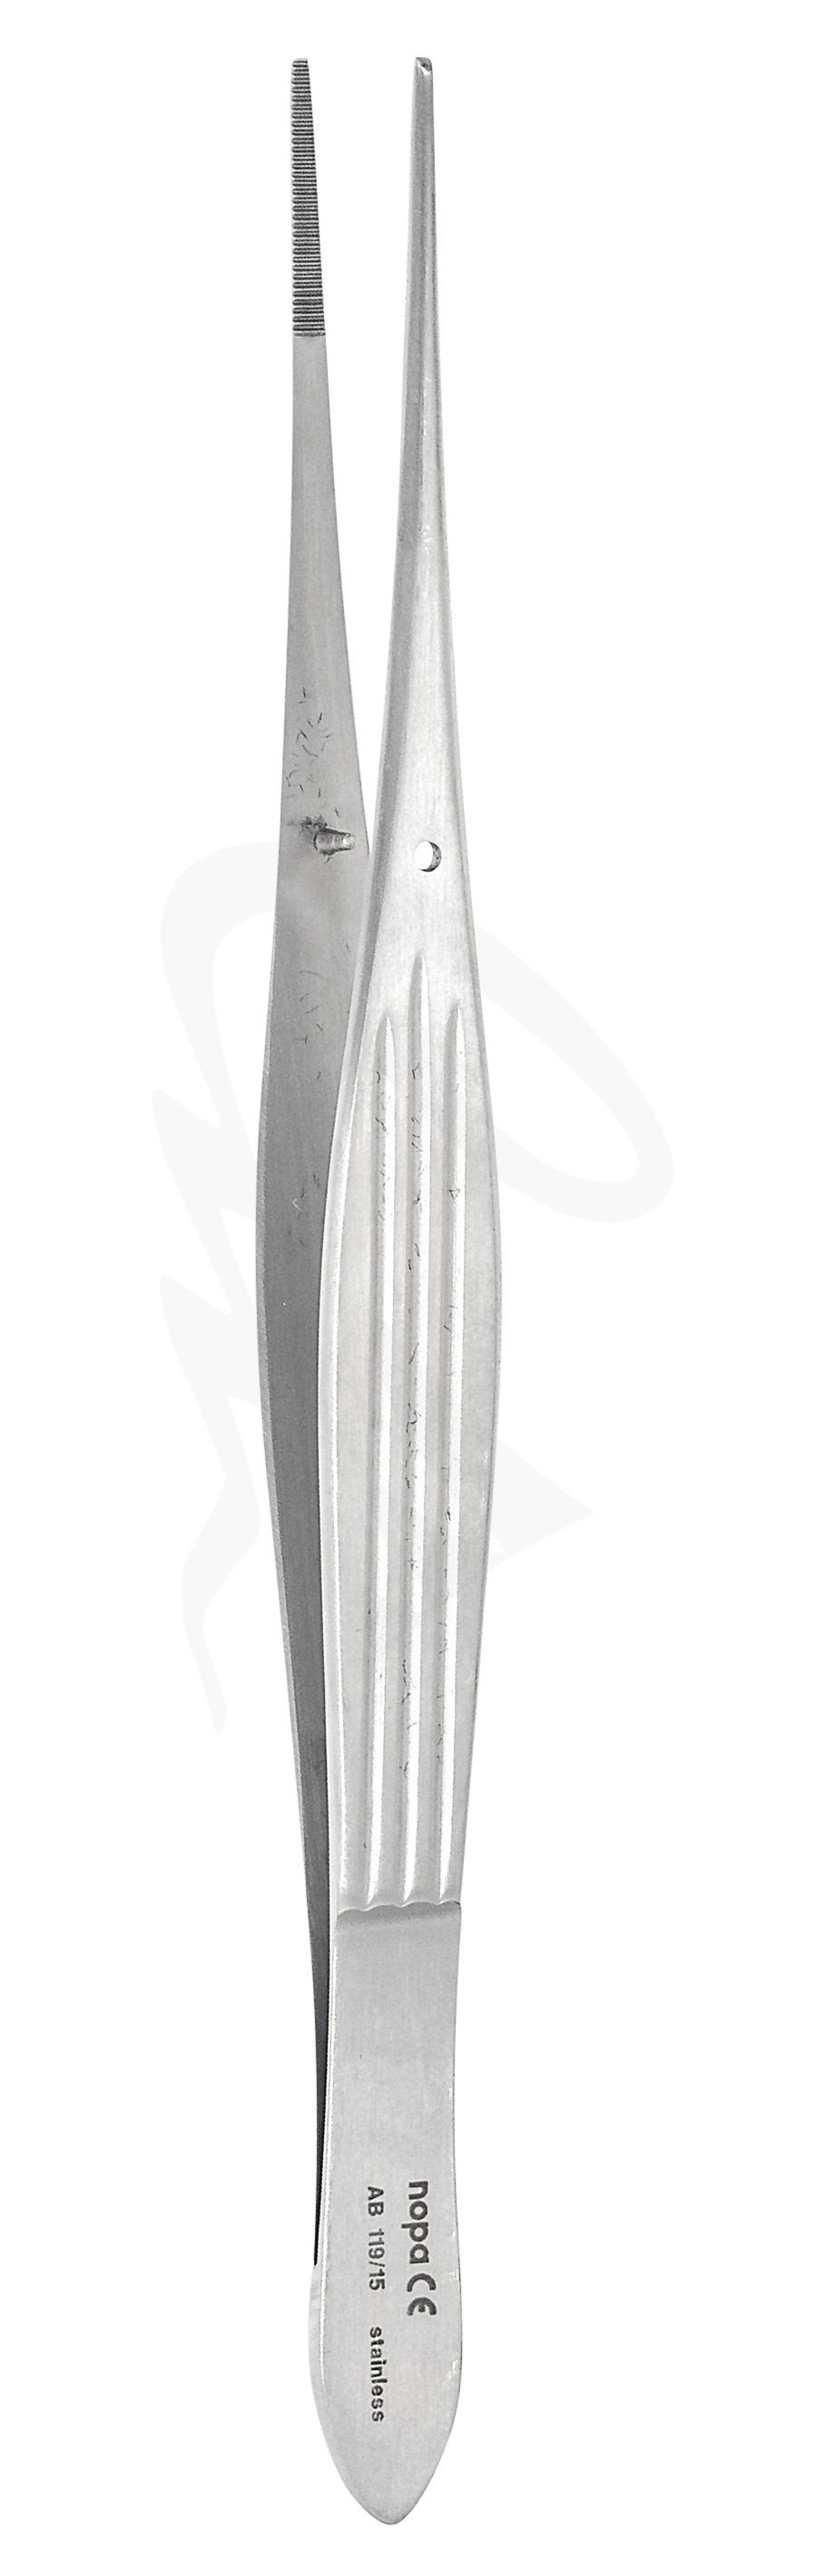 Dressing Forcep - Forceps - Medical & Surgical Instruments - Capes ...